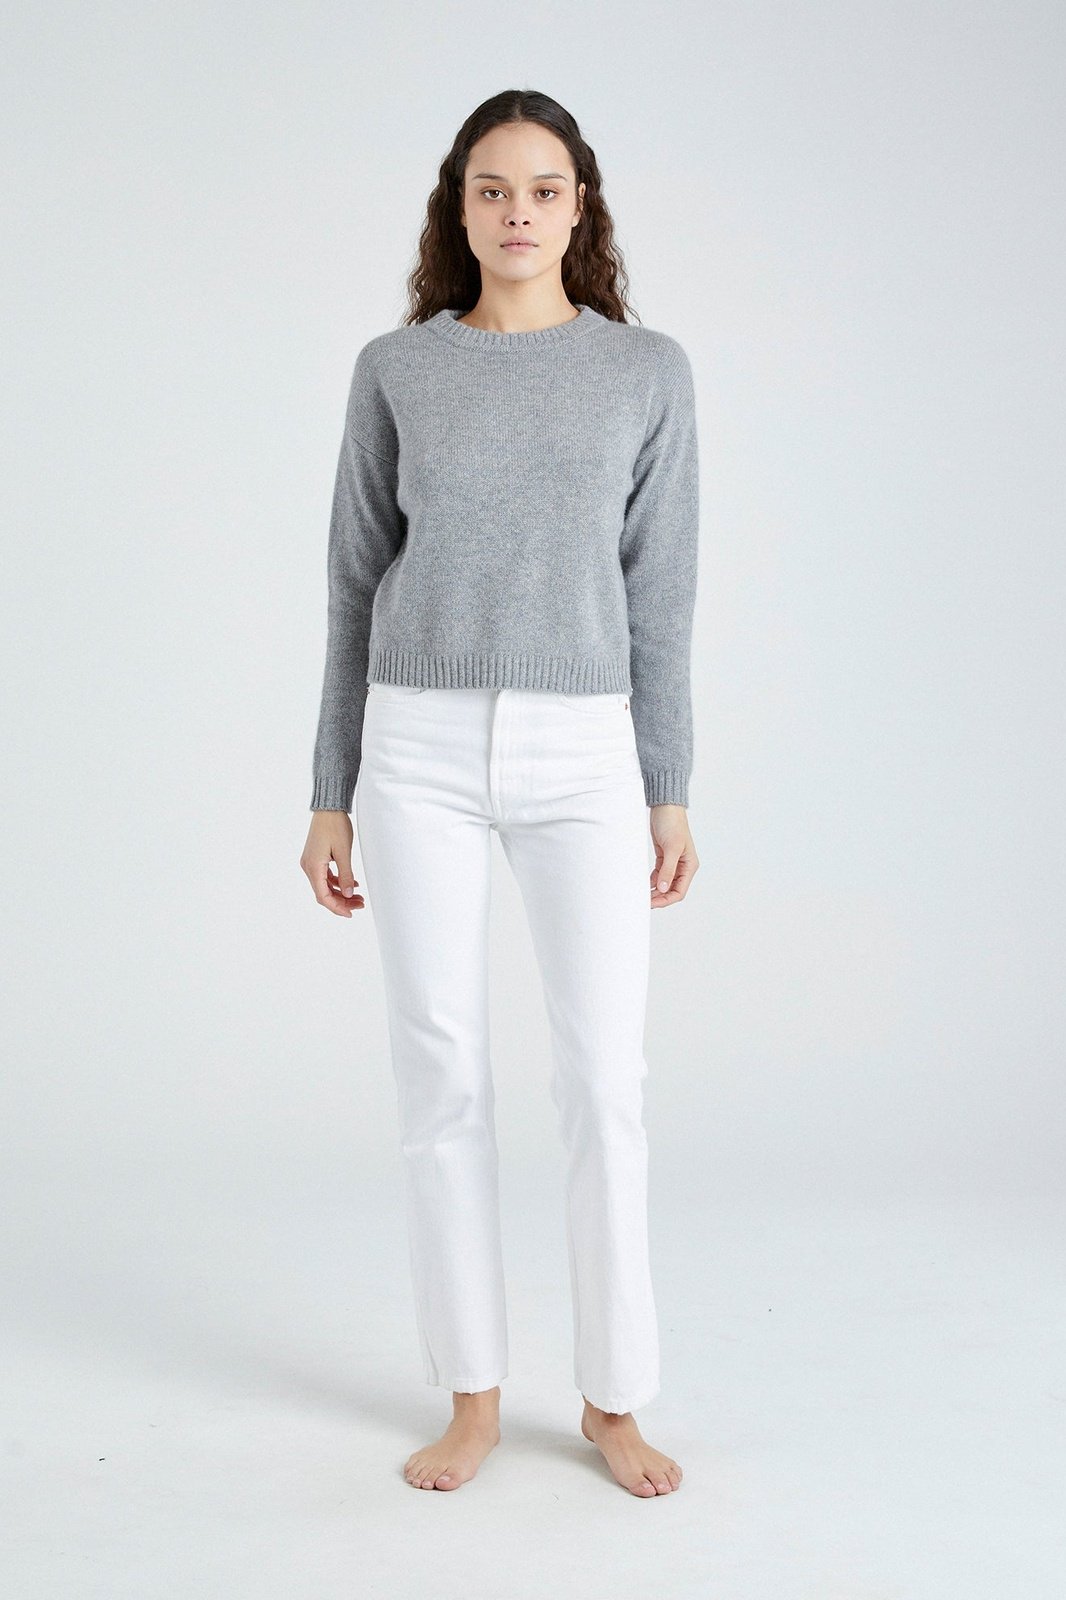 + Beryll Holly Cashmere Sweater | Pebble Gray - +Beryll Holly Cashmere Sweater | Shell Gray - +Beryll Worn By Good People